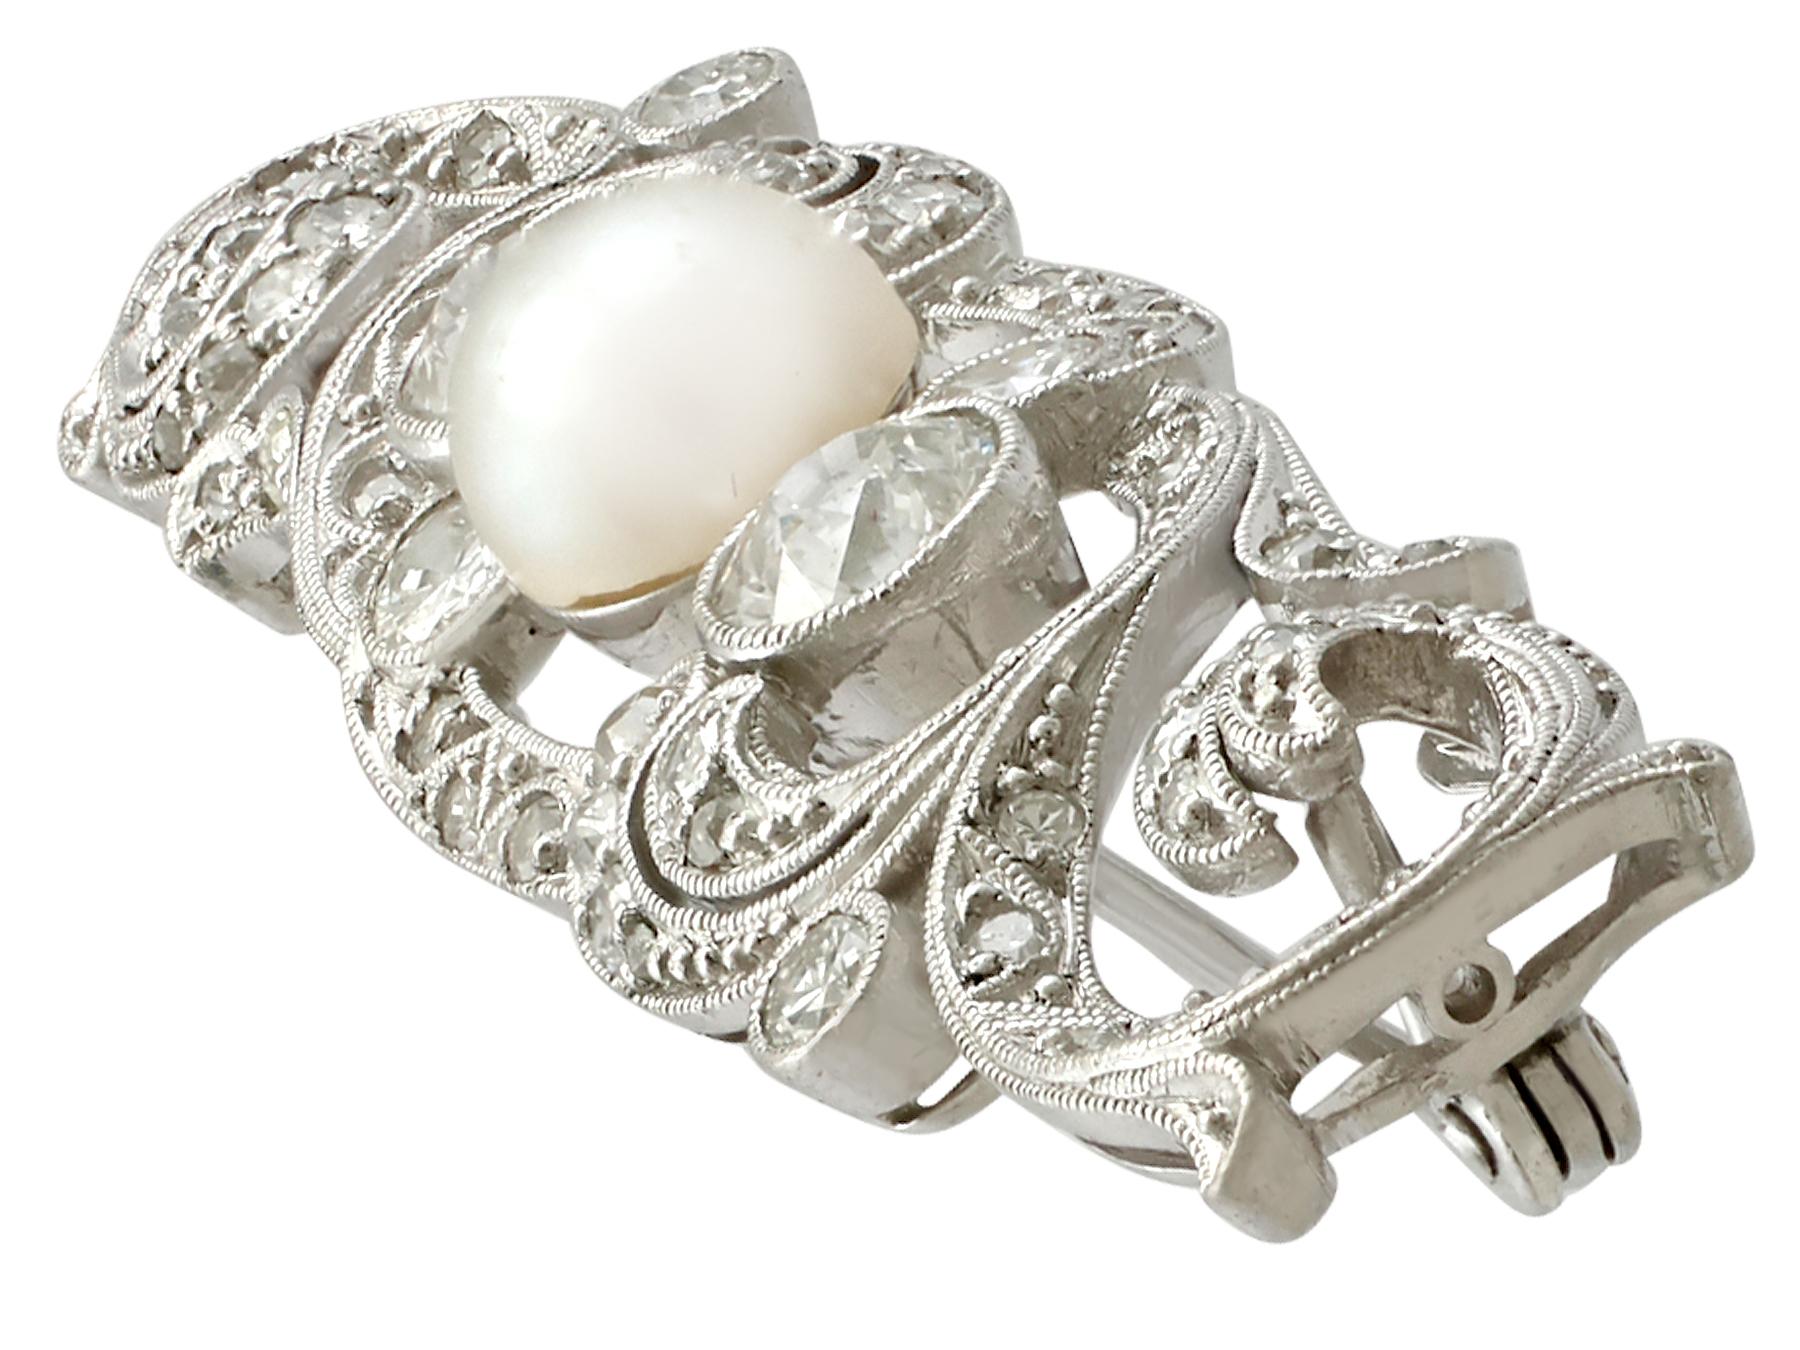 A stunning antique 1920s 2.30 carat diamond and pearl, 14 karat white gold and platinum set brooch; part of our diverse antique jewelry and estate jewelry collections.

This stunning, fine and impressive antique pearl and diamond brooch has been